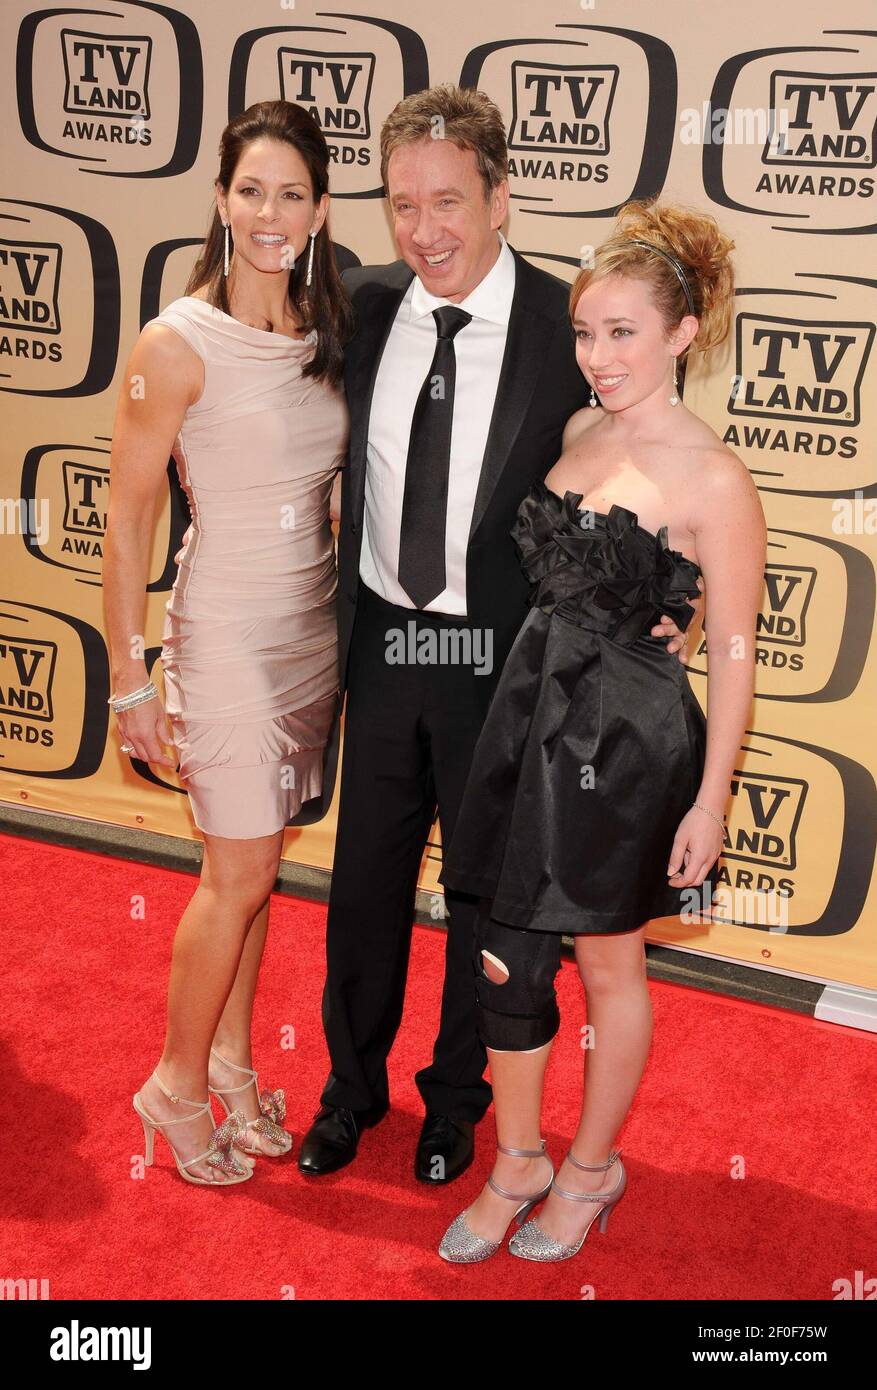 Jane Hajduk, Tim Allen and daughter Allen. 17 April 2010, Culver City, CA. The 8th Annual TV Land Awards held at Pictures Studios. Photo Giulio Marcocchi/Sipa Press./TvLand gm.049/1004190957 Stock